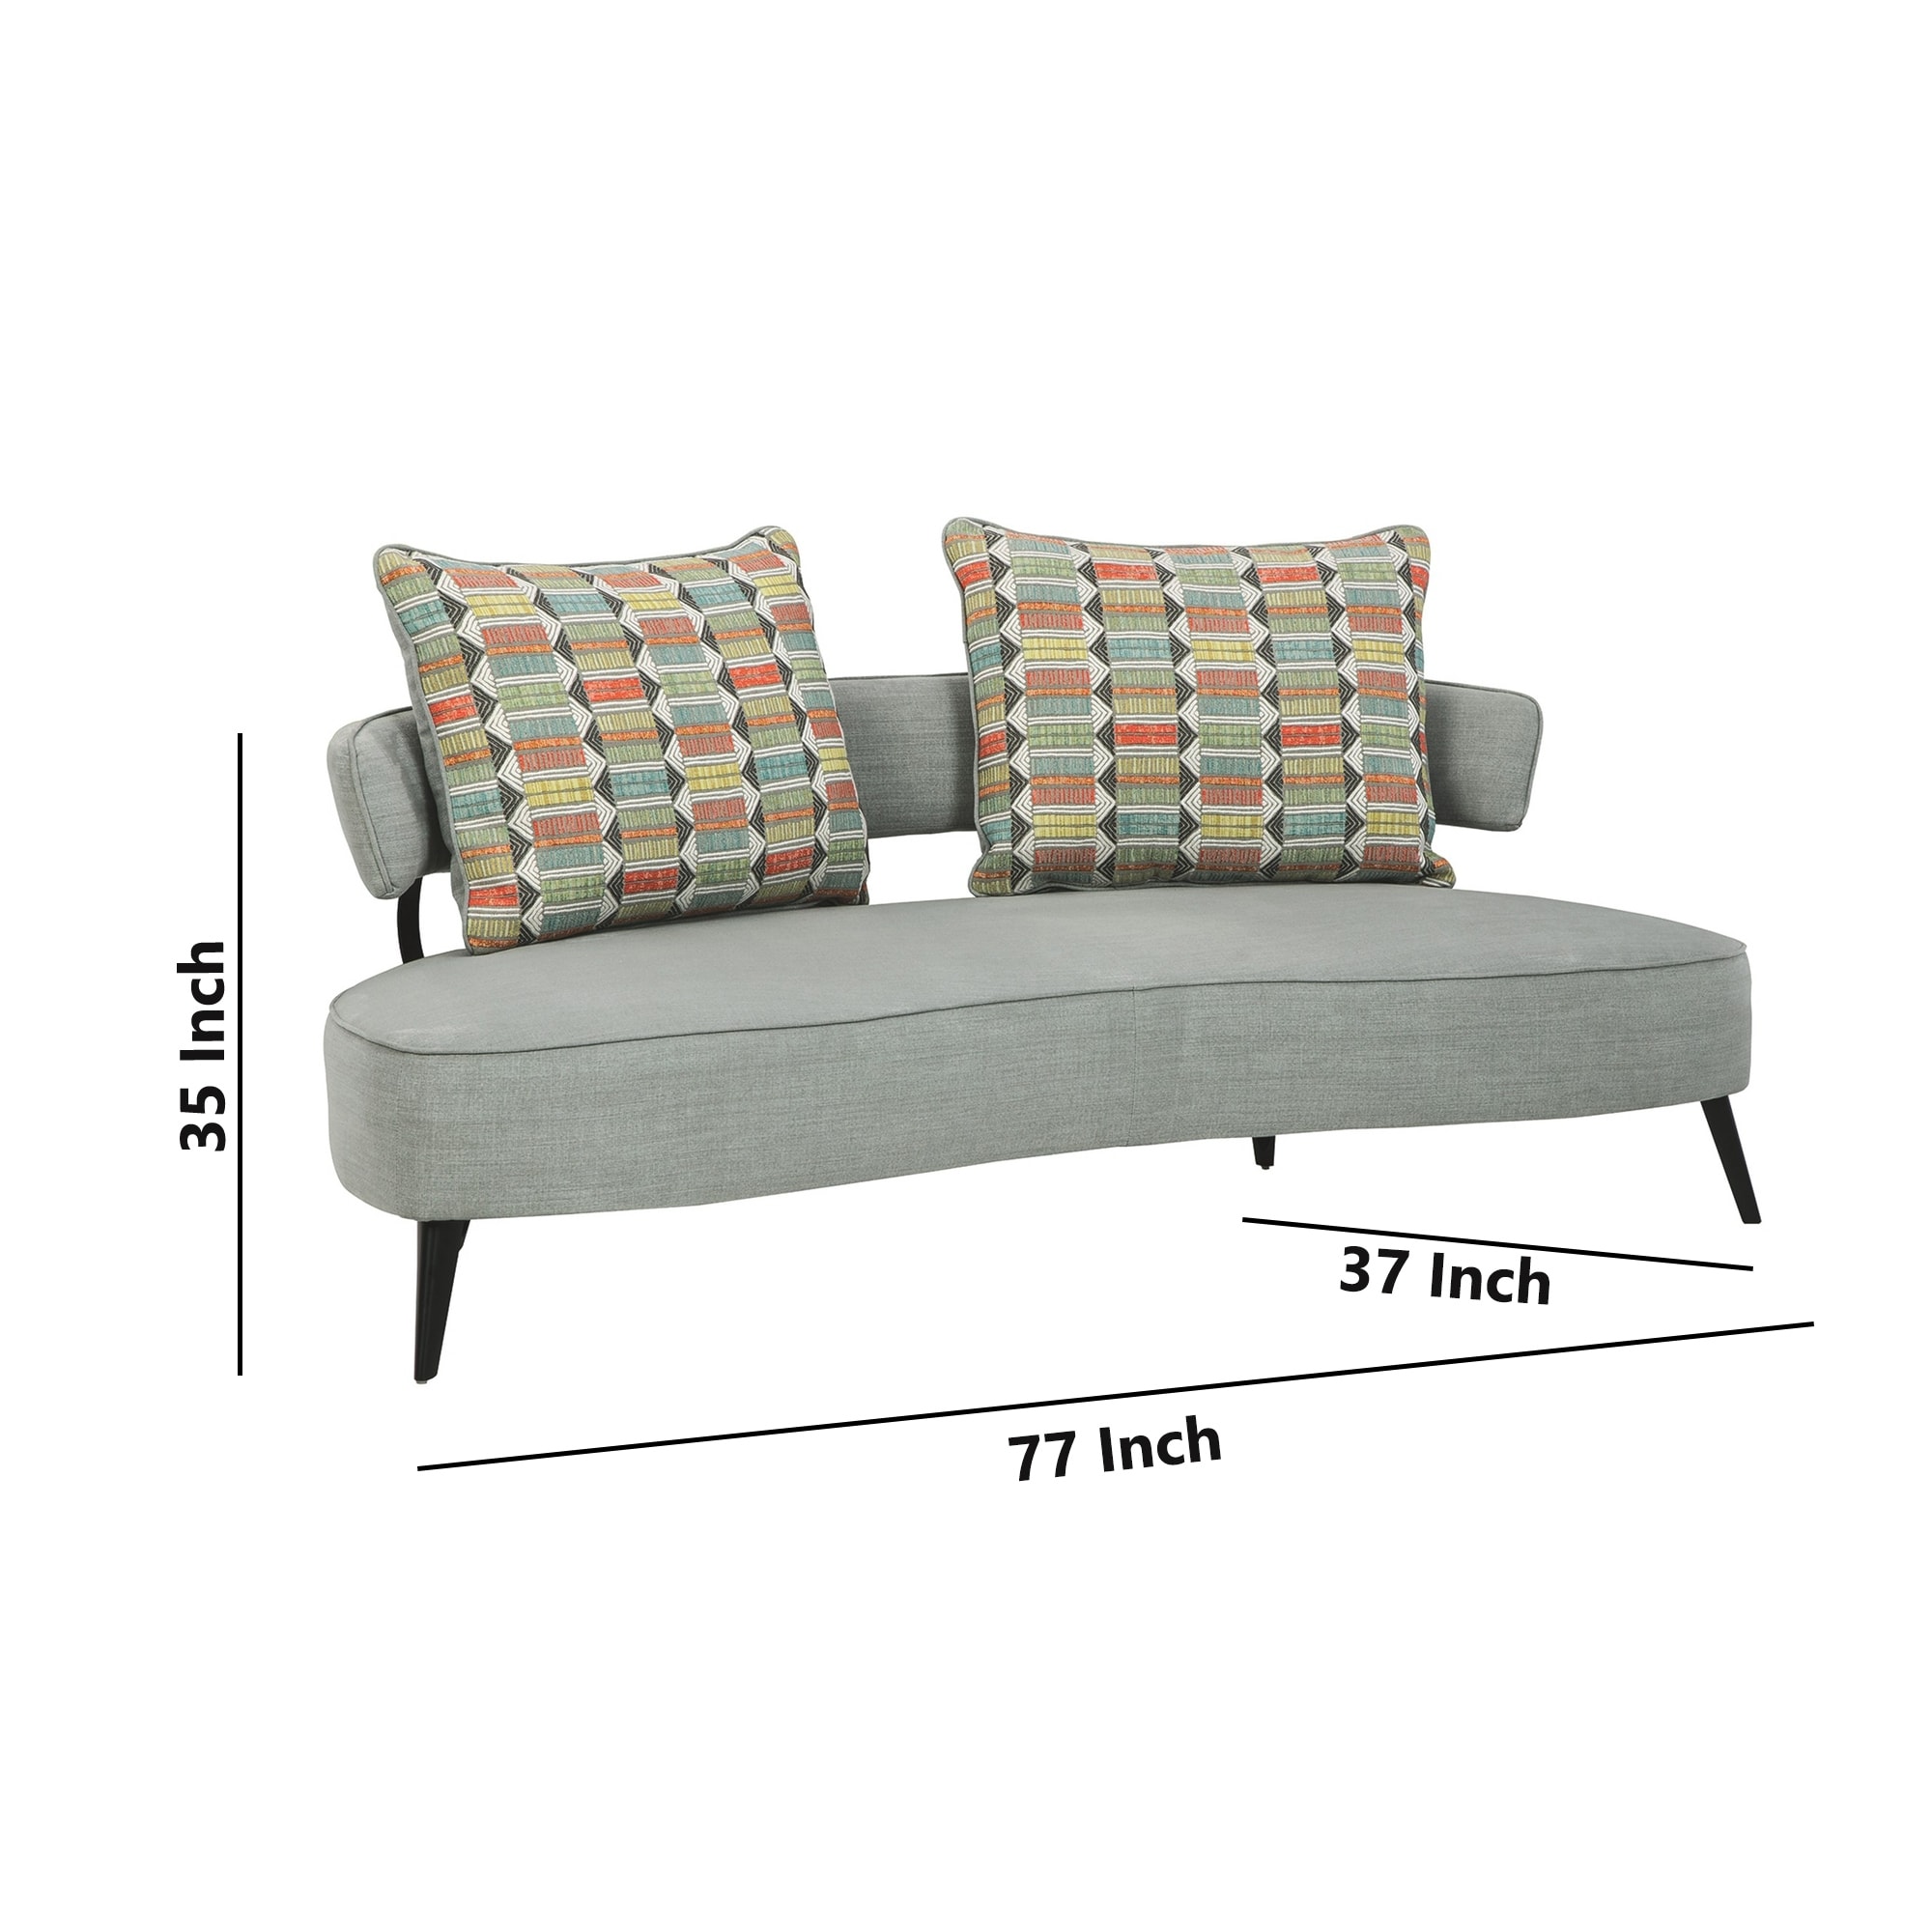 Clean the floor yours shorthand Fabric Upholstered Split Back Curved Sofa with Metal Legs, Gray - Overstock  - 31887342